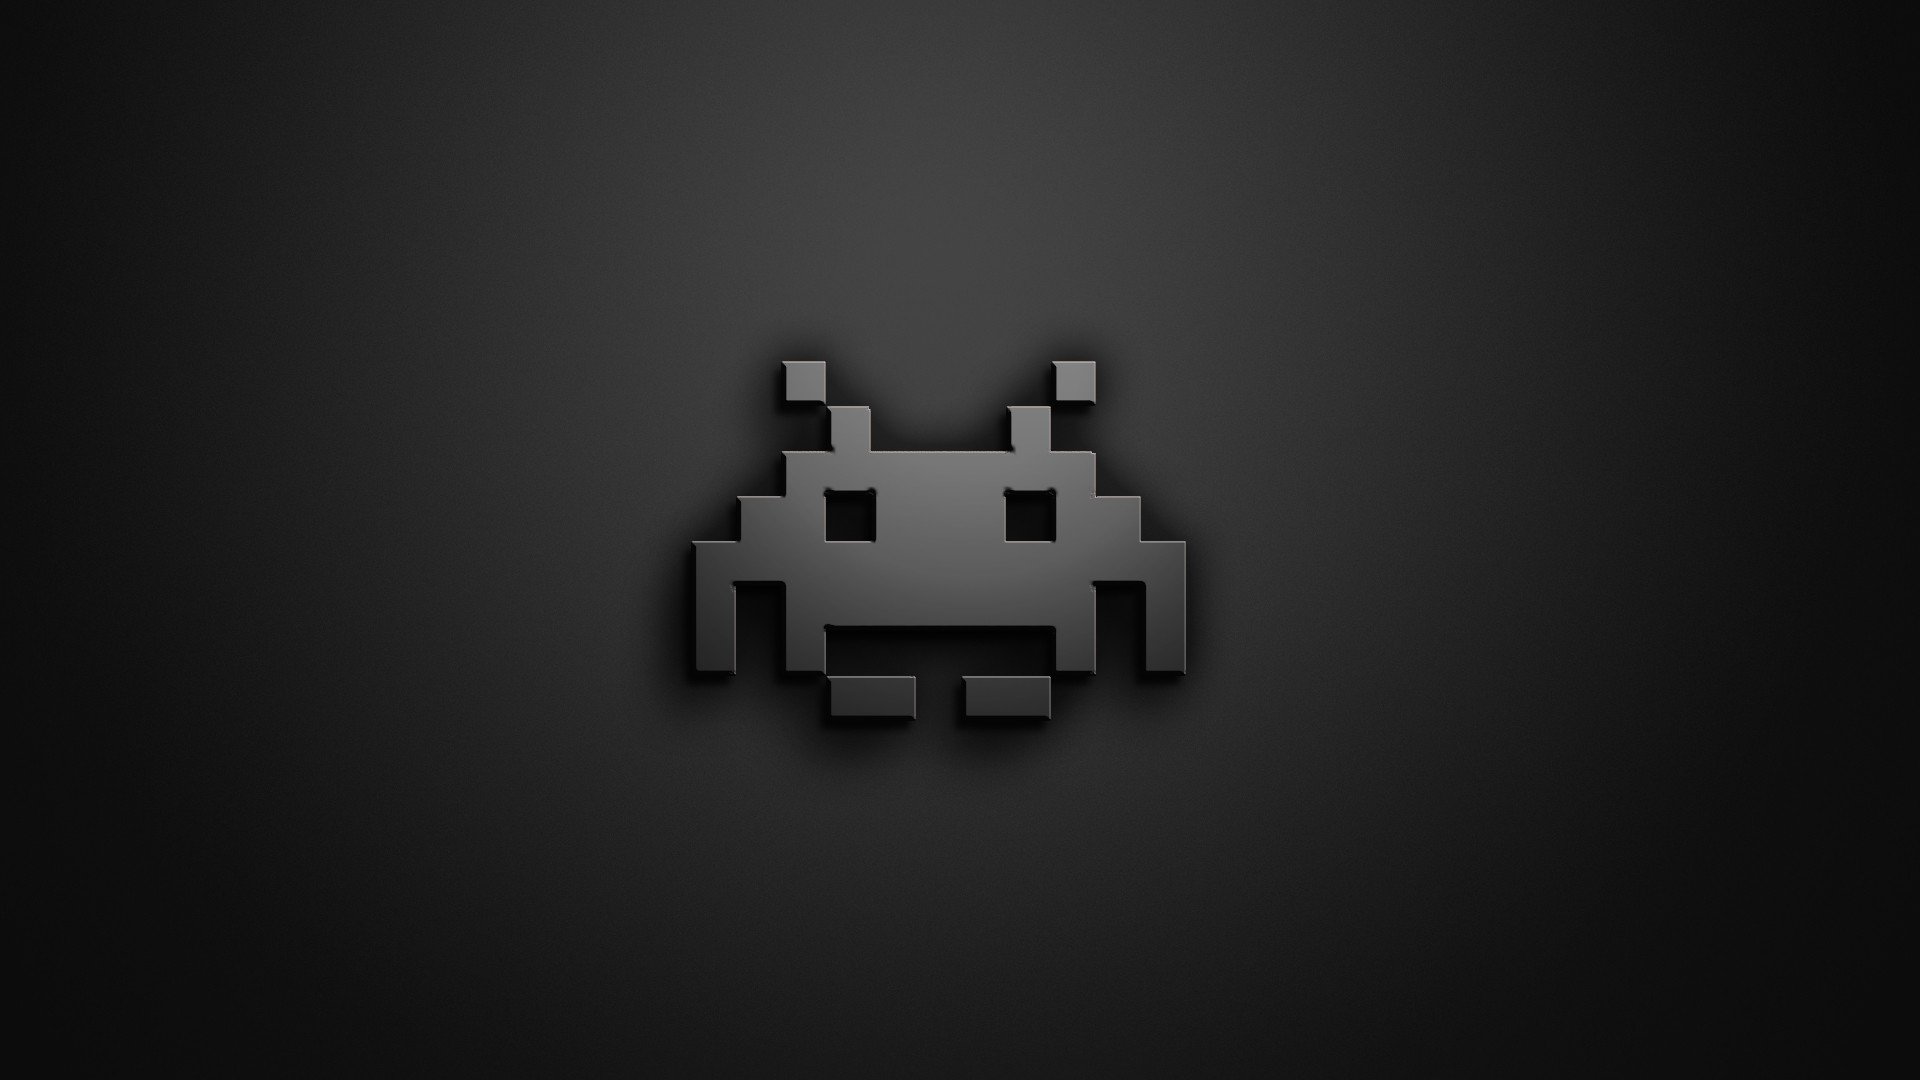 Space Invaders, Retro games, Video games, Monochrome, Simple background, Digital art Wallpaper